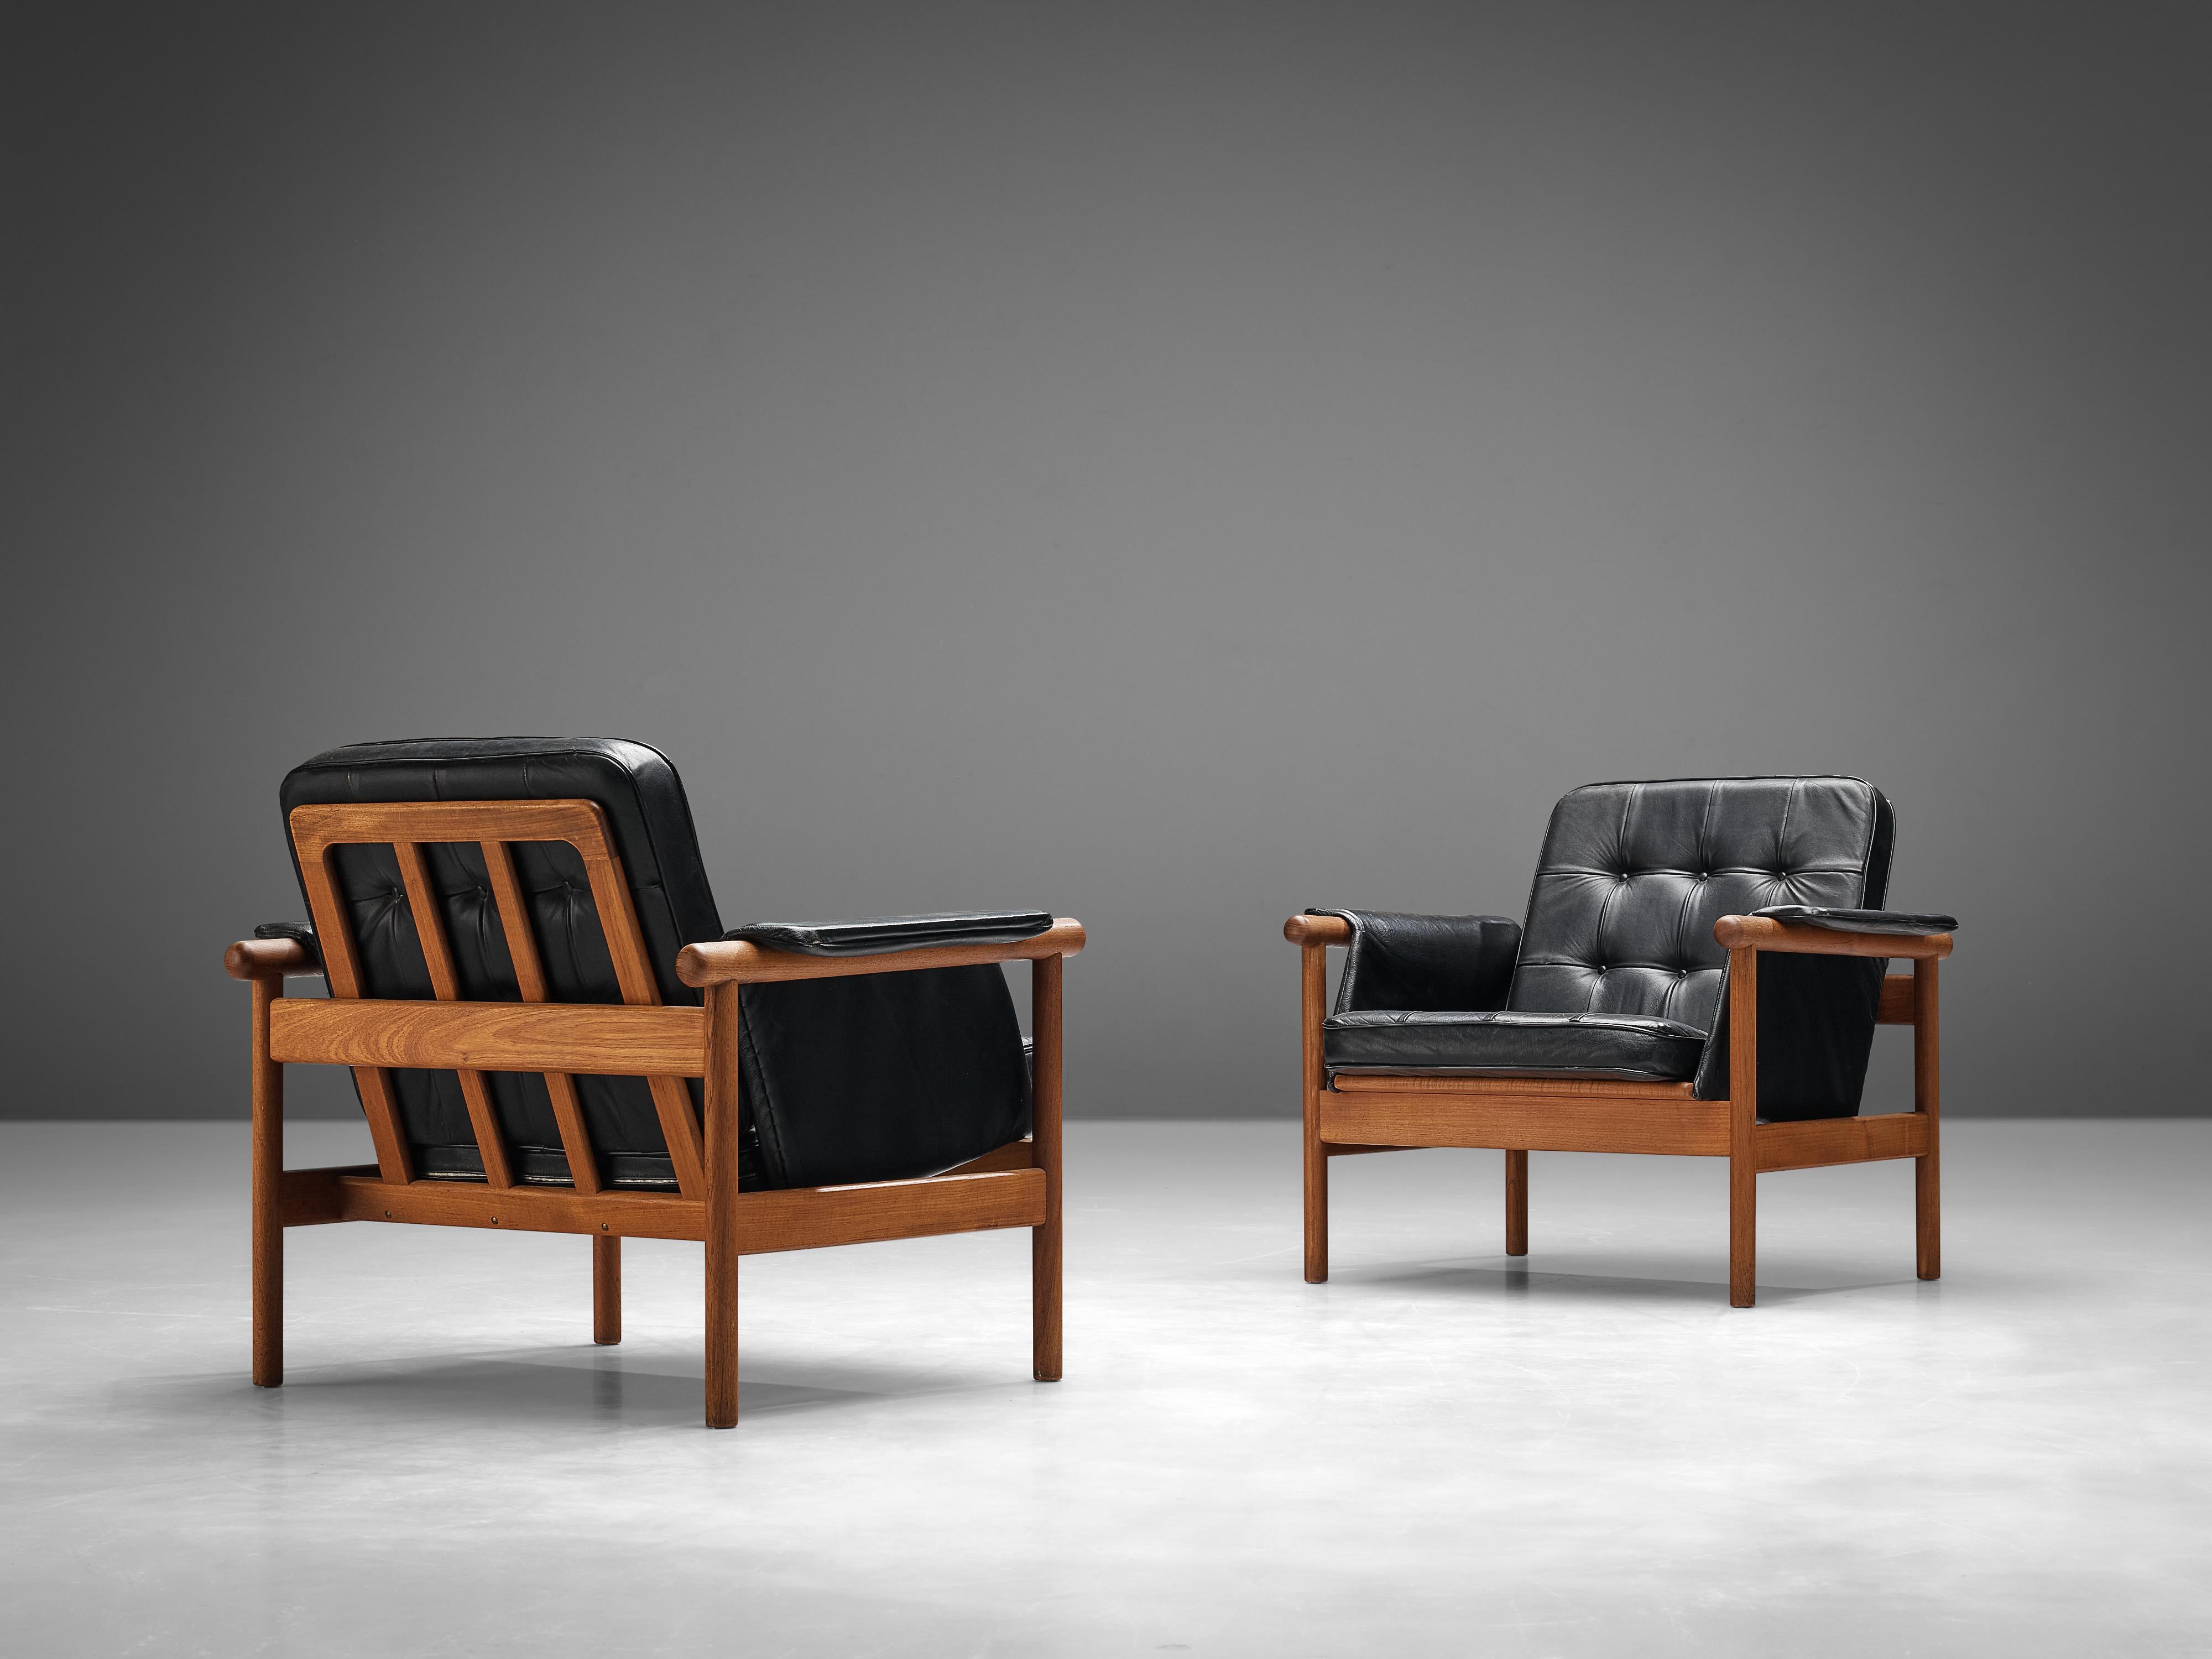 Illum Wikkelsø, easy chairs model 'Wiki', black leather, teak, Denmark,1960s

This set of easy chairs feature a teak frame with a slatted back and an angular, geometric frame. The chairs are named 'Wiki' and feature a tufted seat and back cushion to